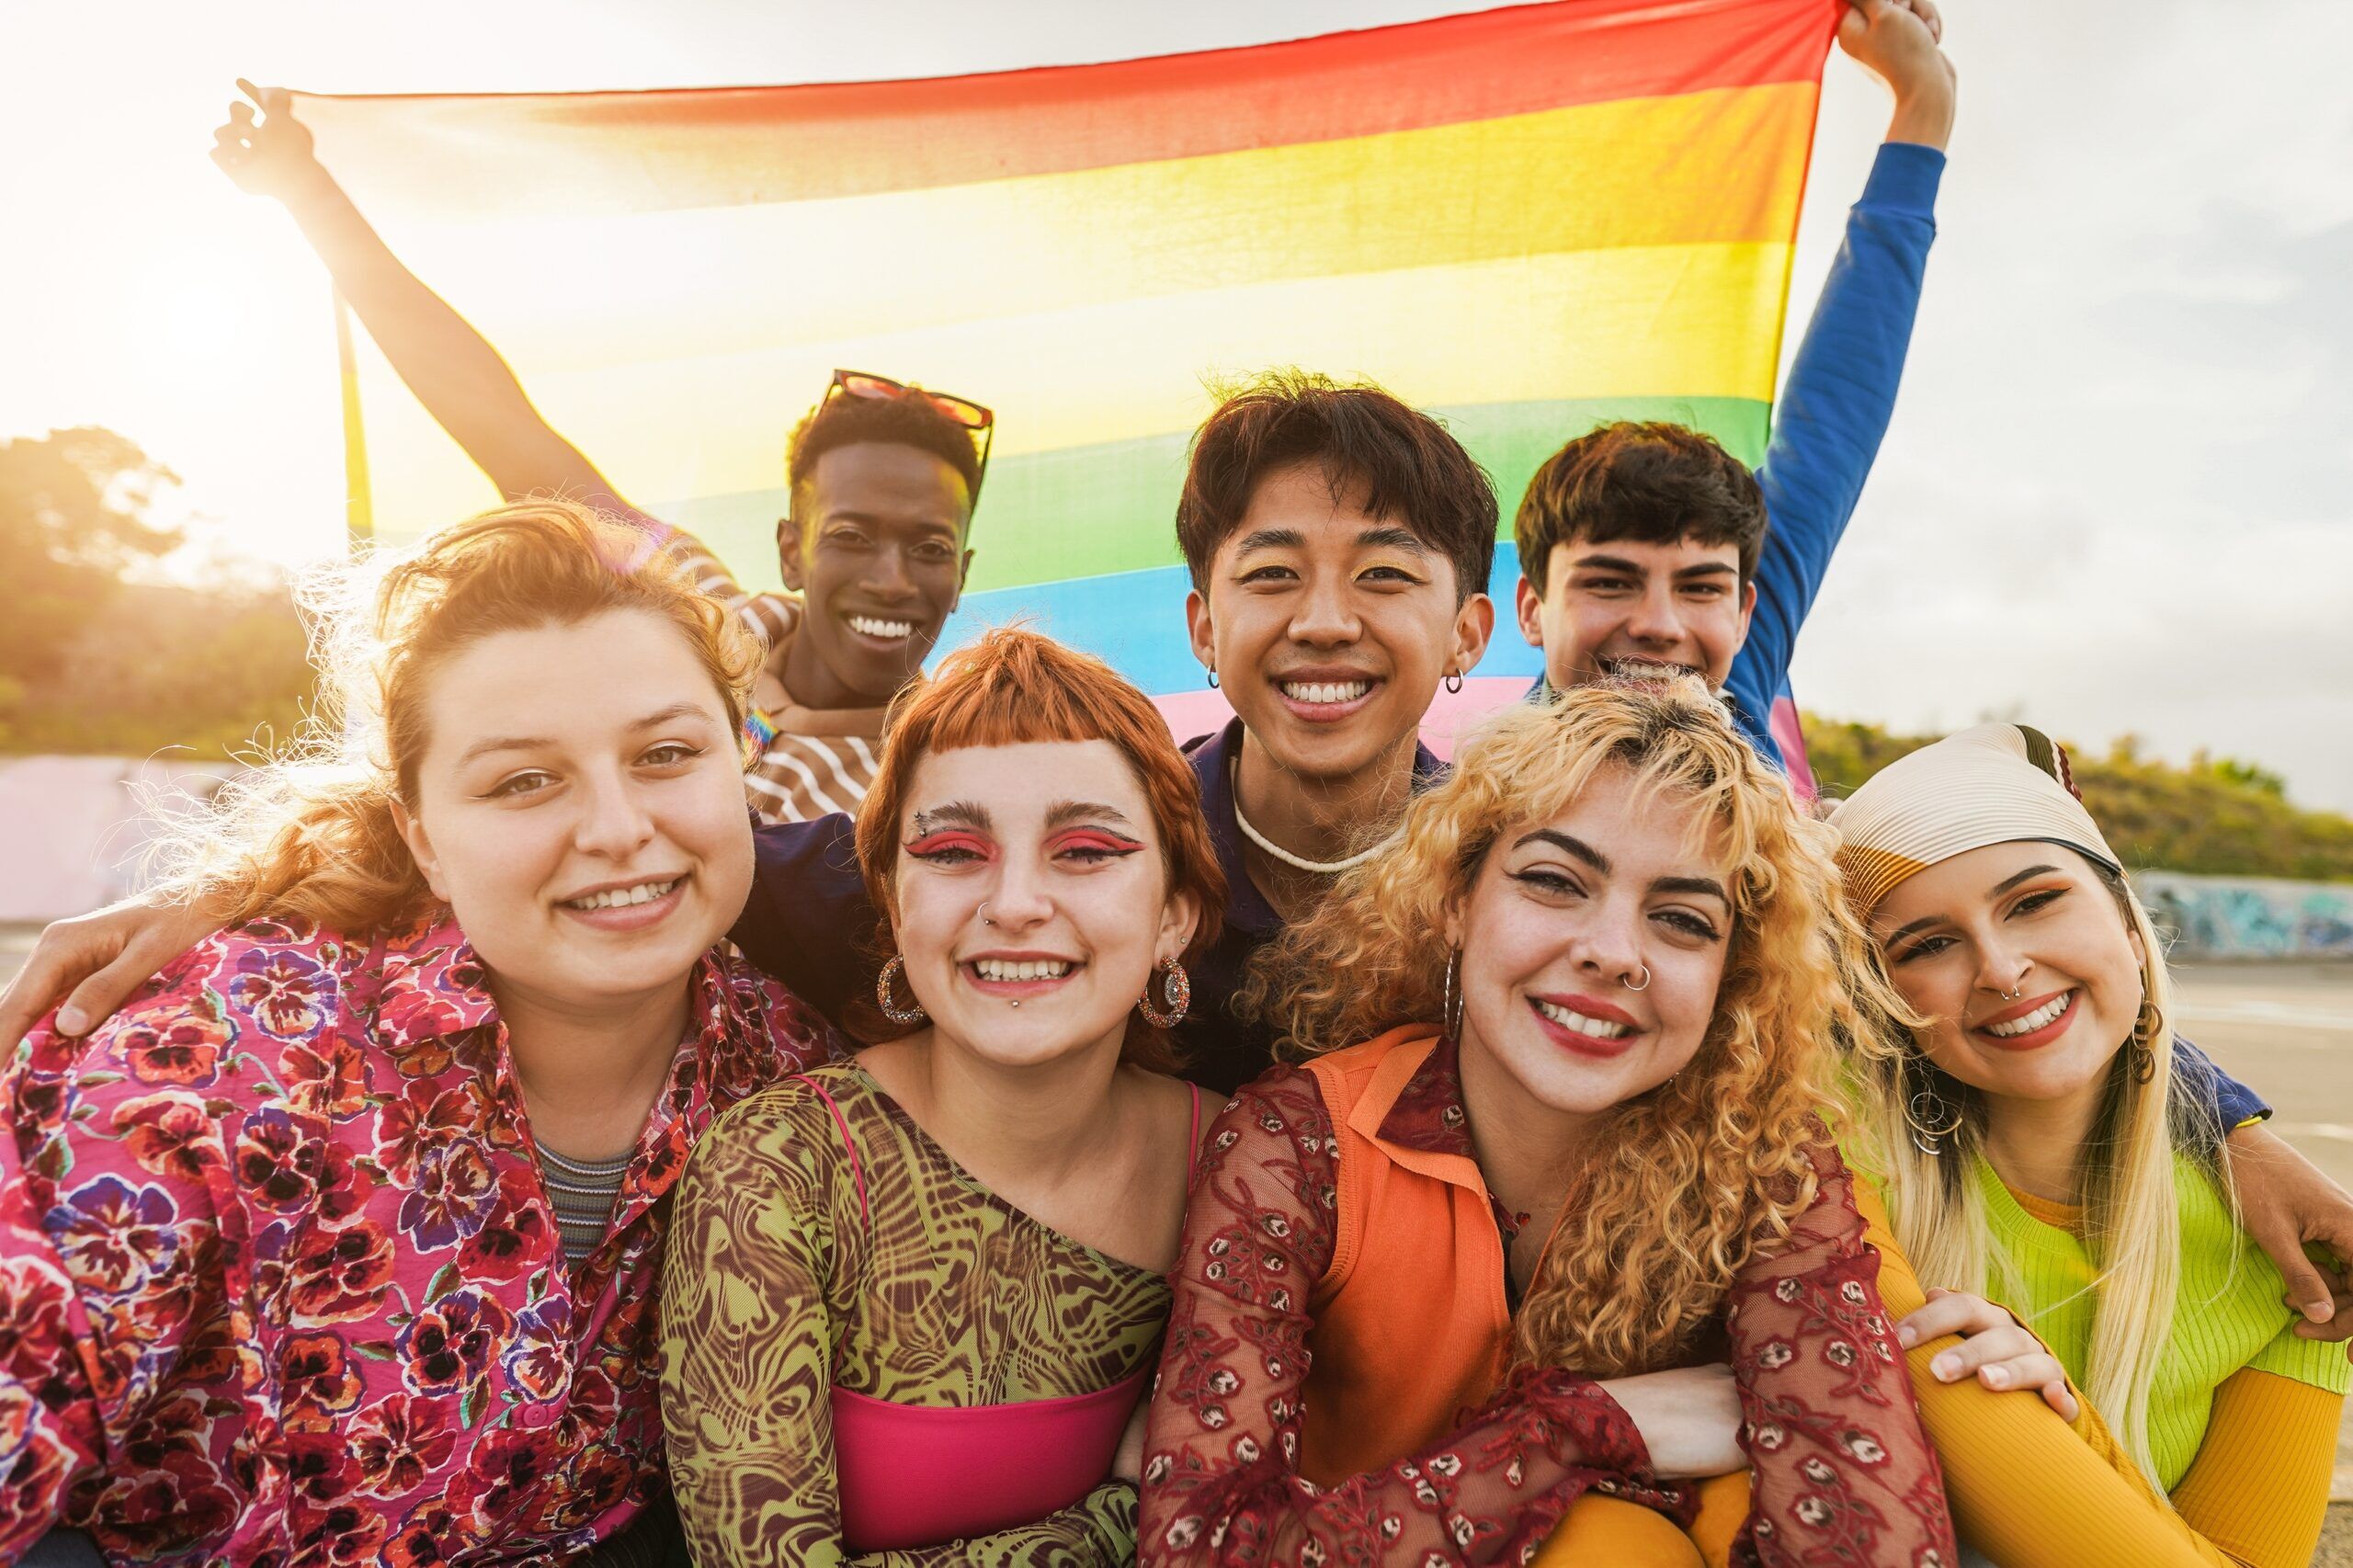 Diverse group of LGBTQ+ youth smiling while holding a rainbow flag